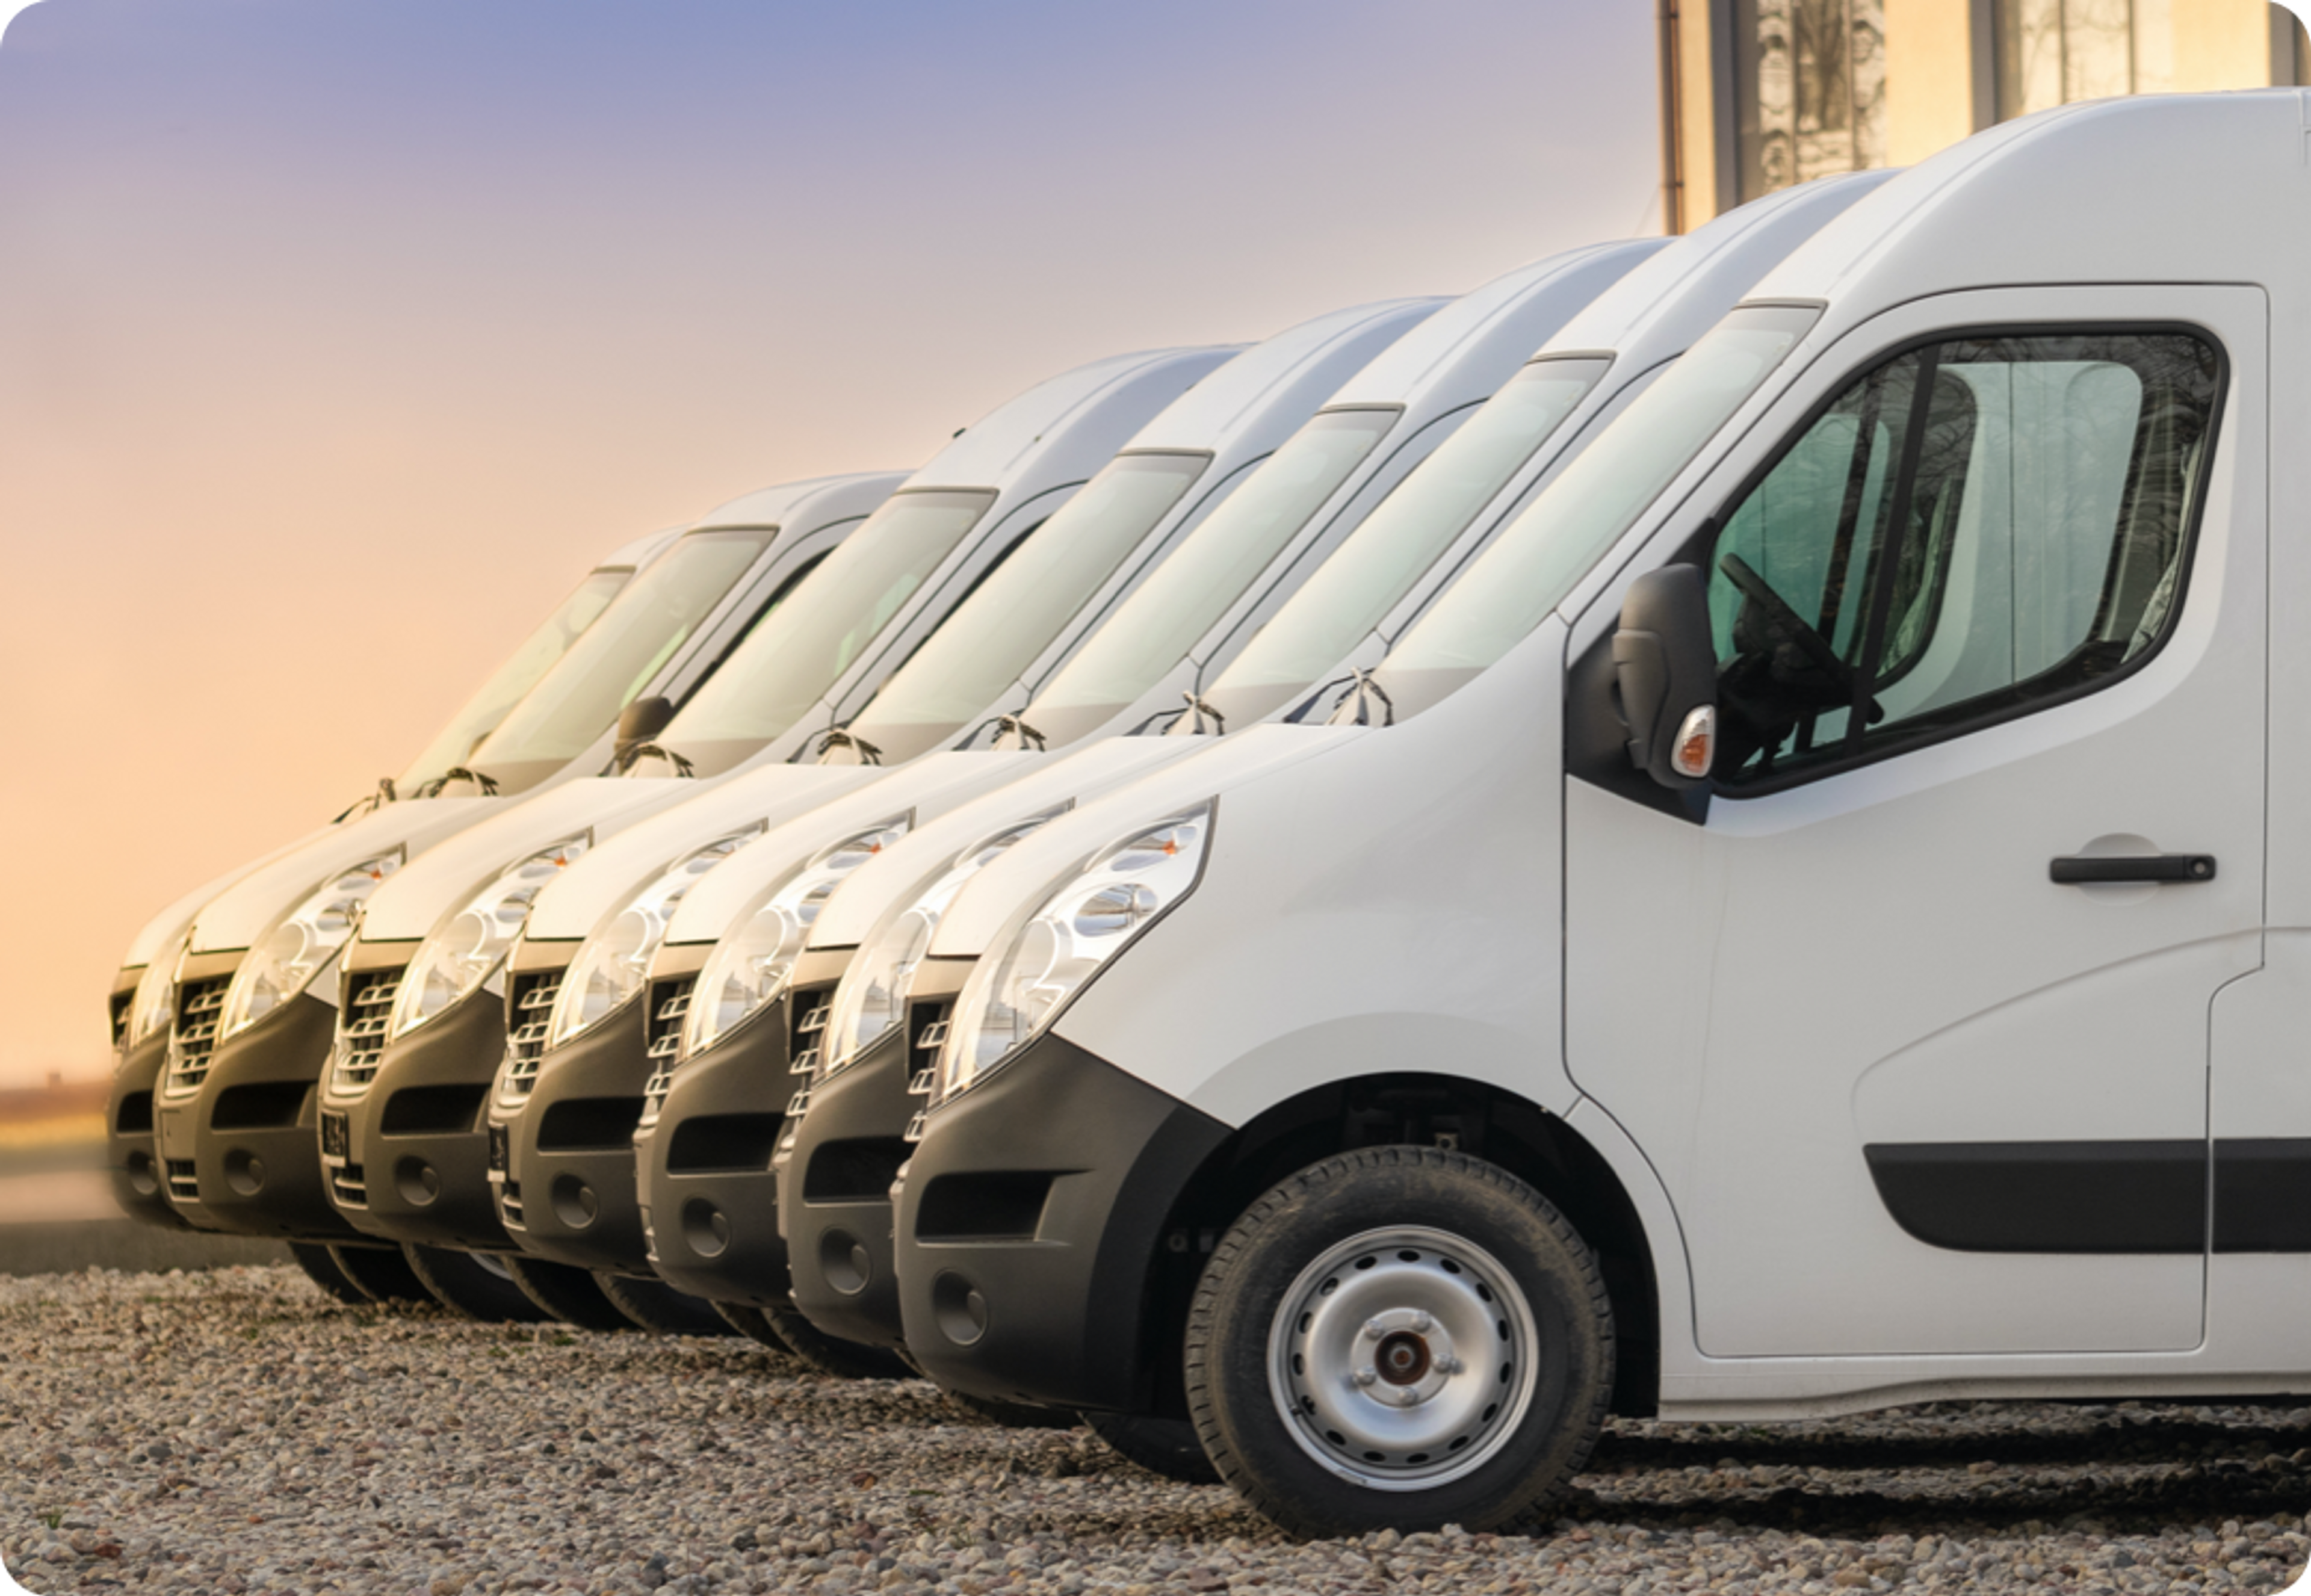 Picture of 8 white fully stocked service vans for troubleshooting repairs